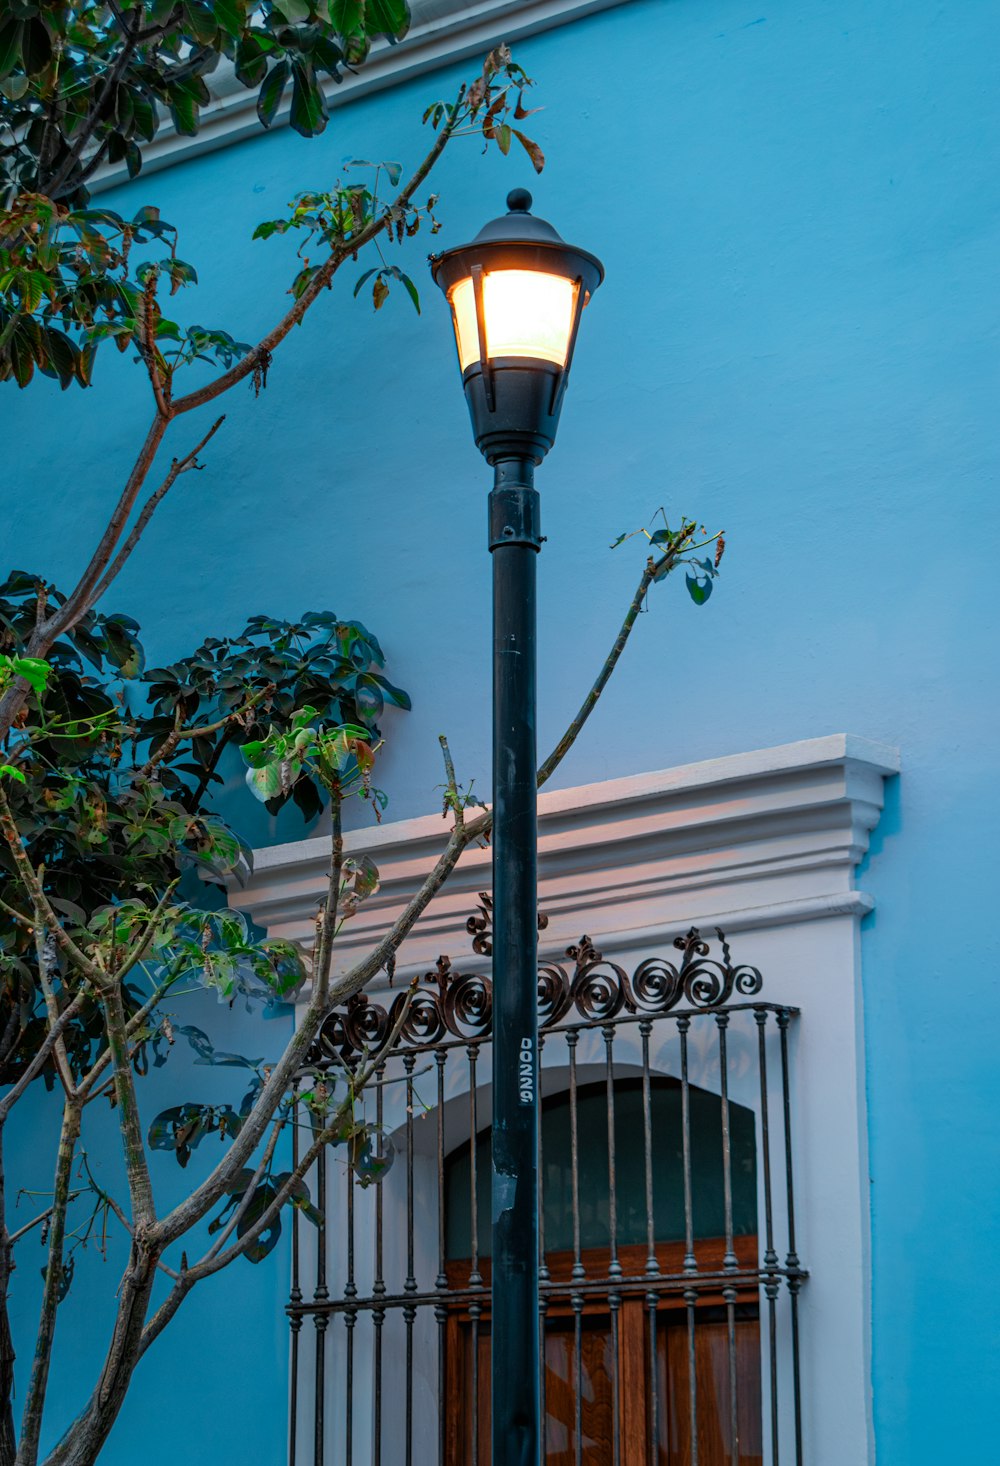 a street light on a pole in front of a blue building